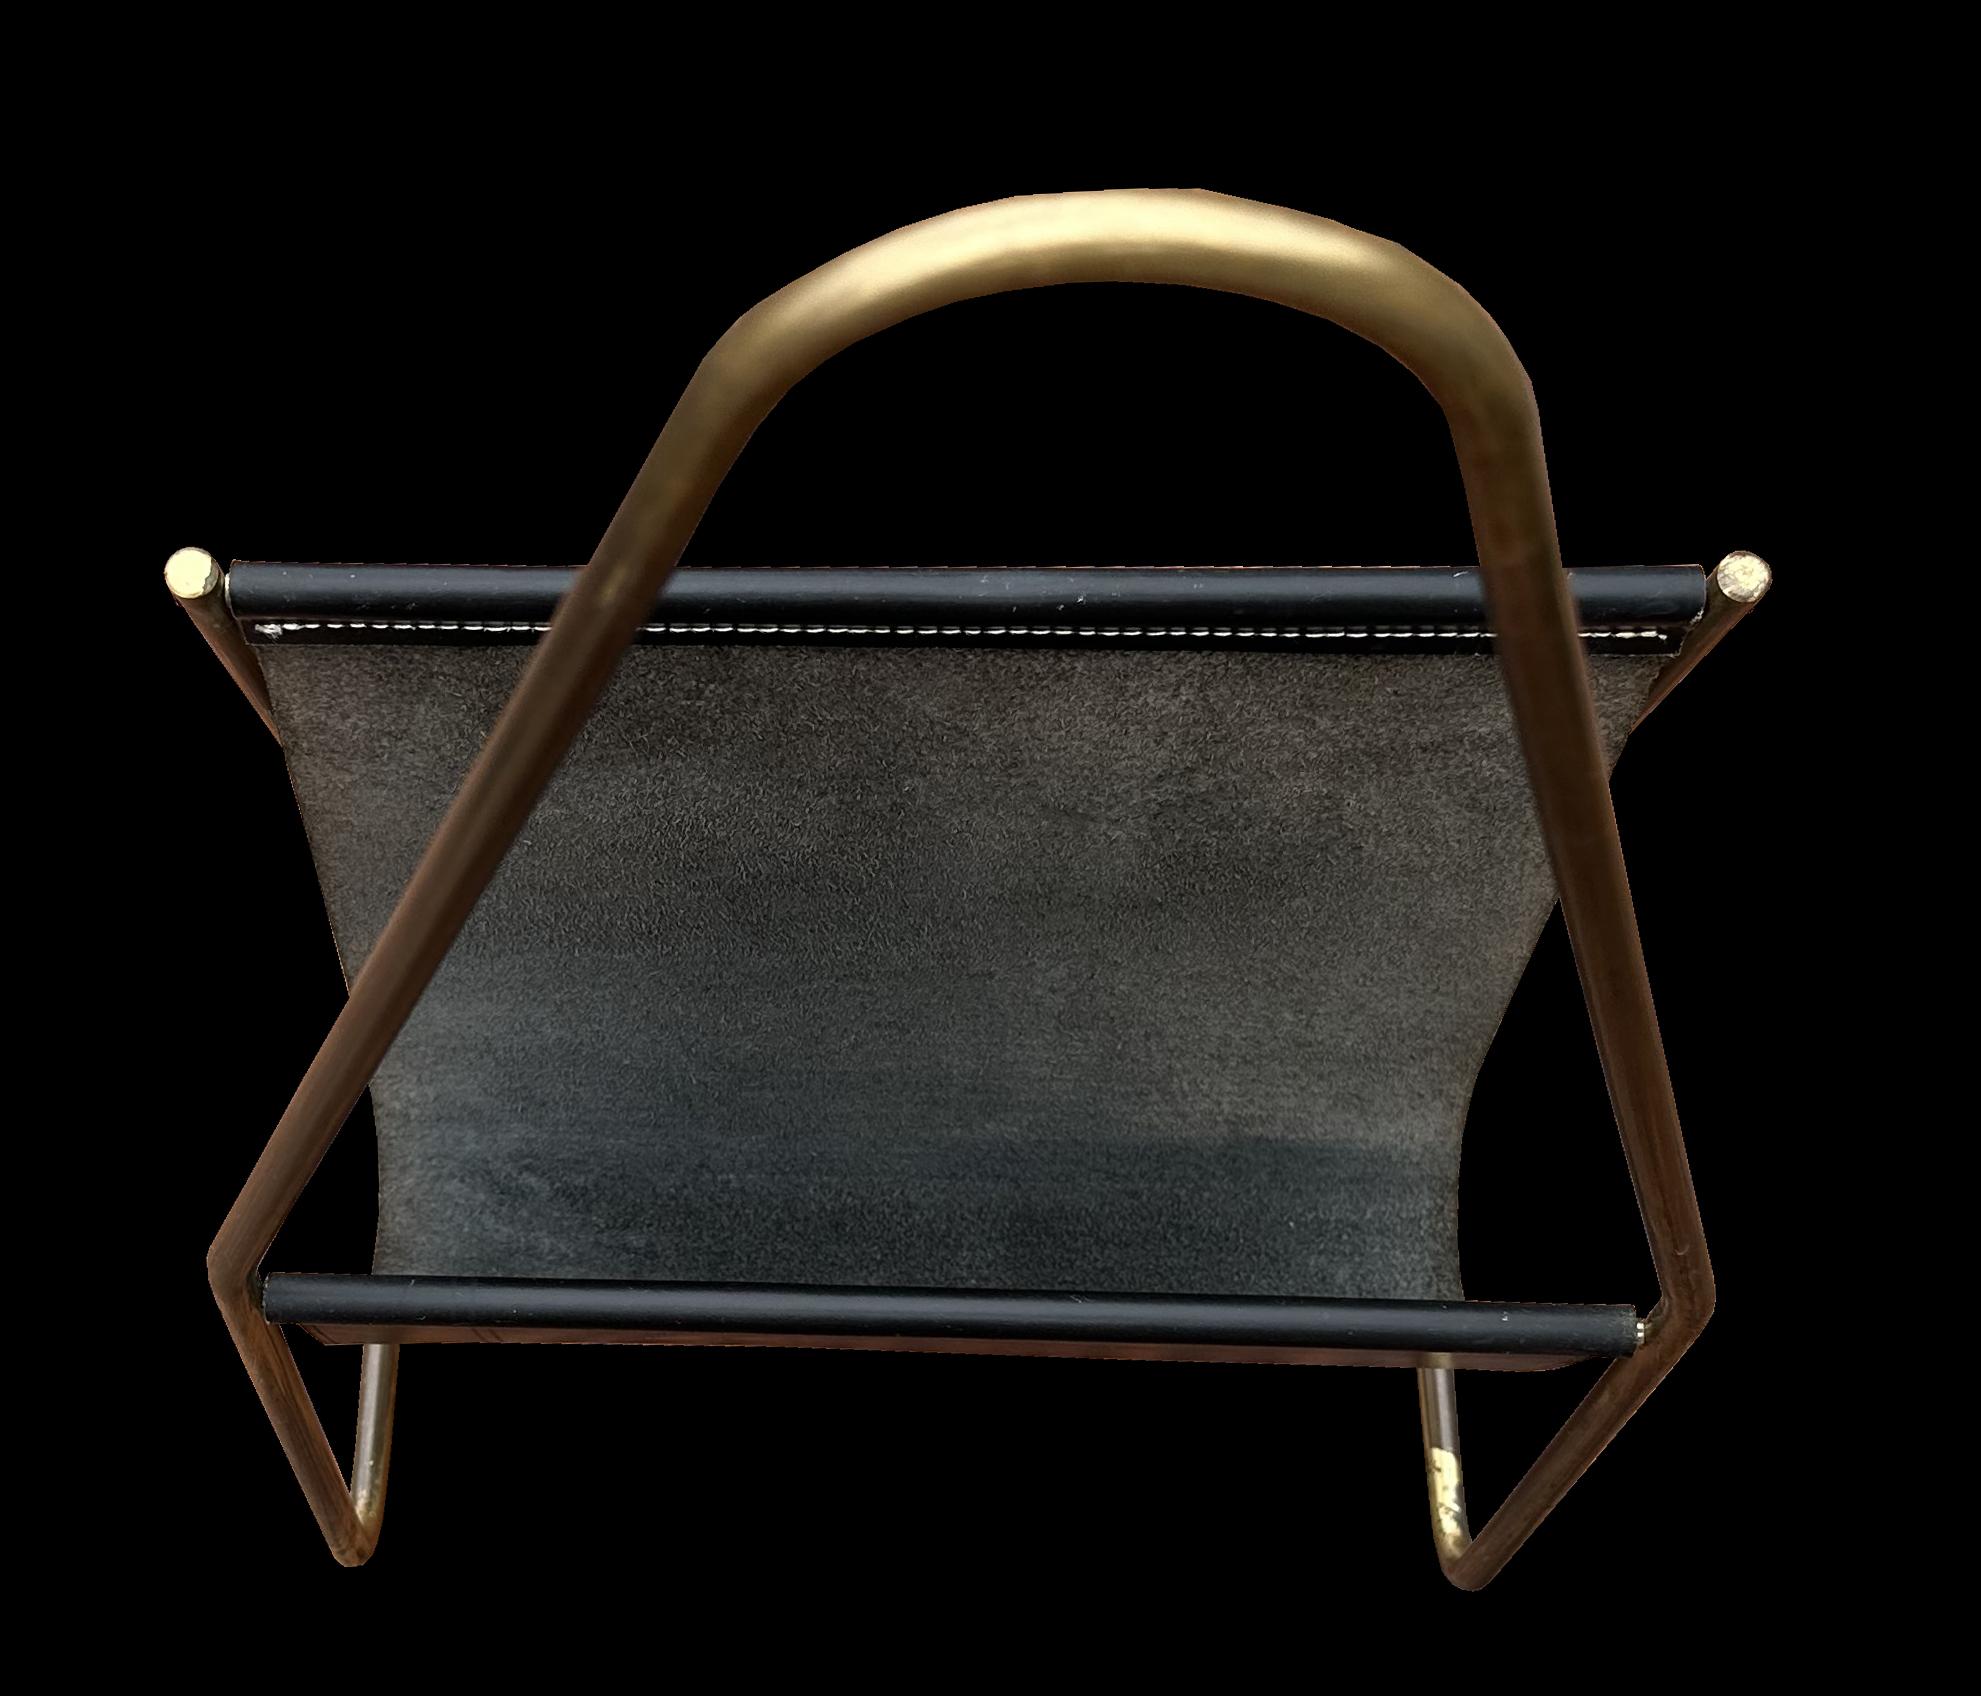 A very nice original magazine rack by Carl Aubock for Aubock Werkstatte in Vienna, this one in brass with black leather.